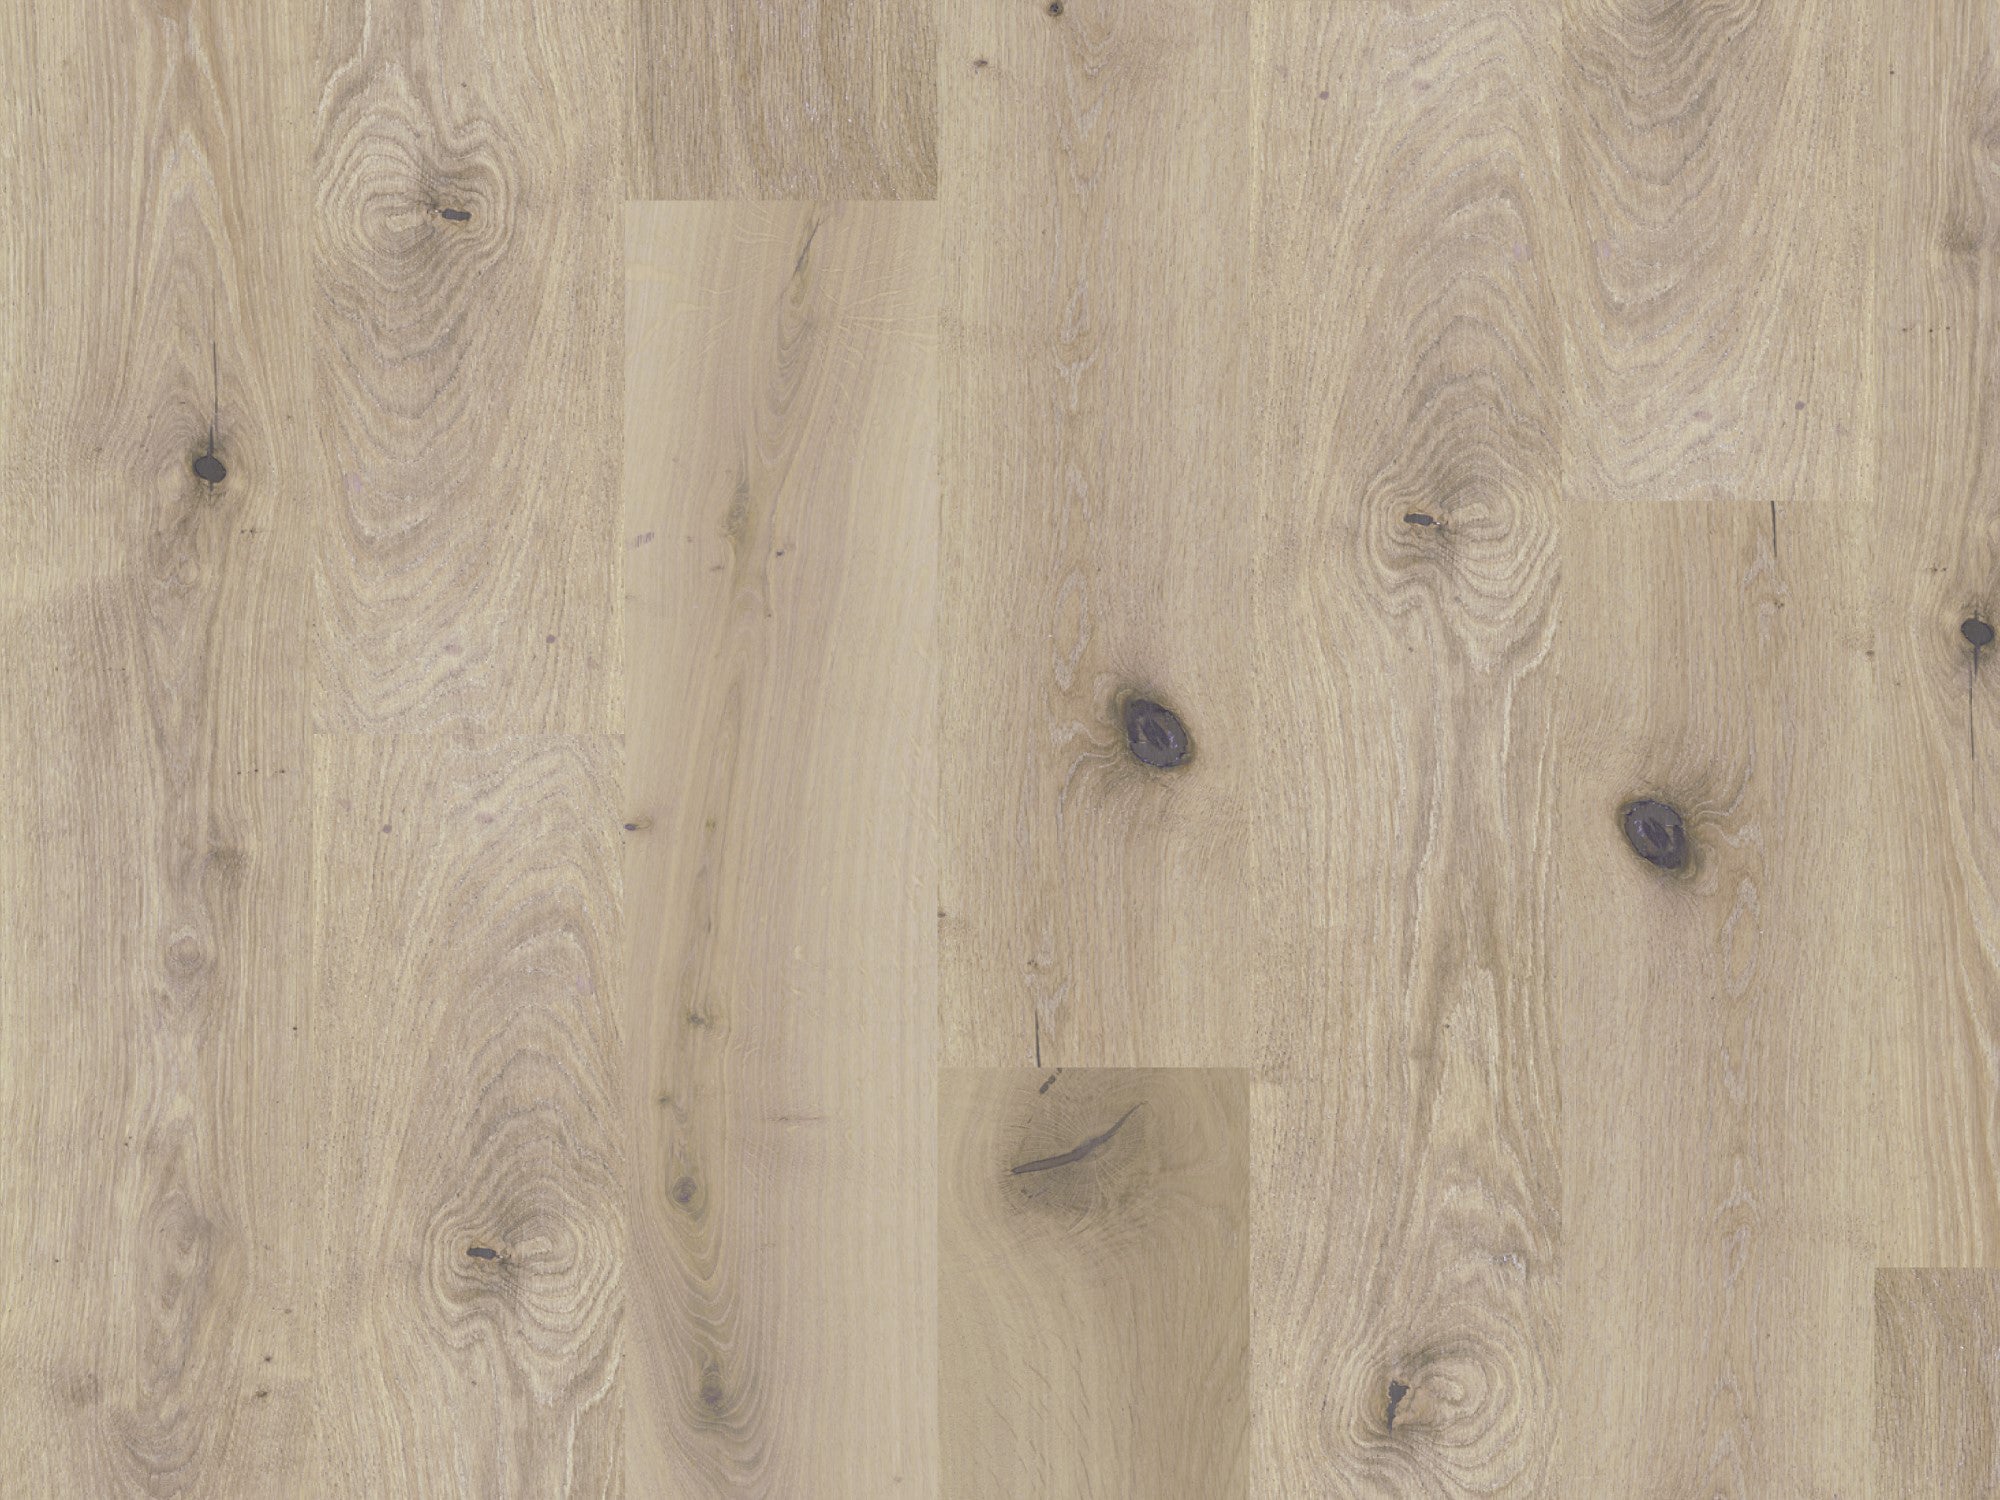 duchateau signature global winds chinook european oak engineered hardnatural wood floor uv lacquer finish for interior use distributed by surface group international